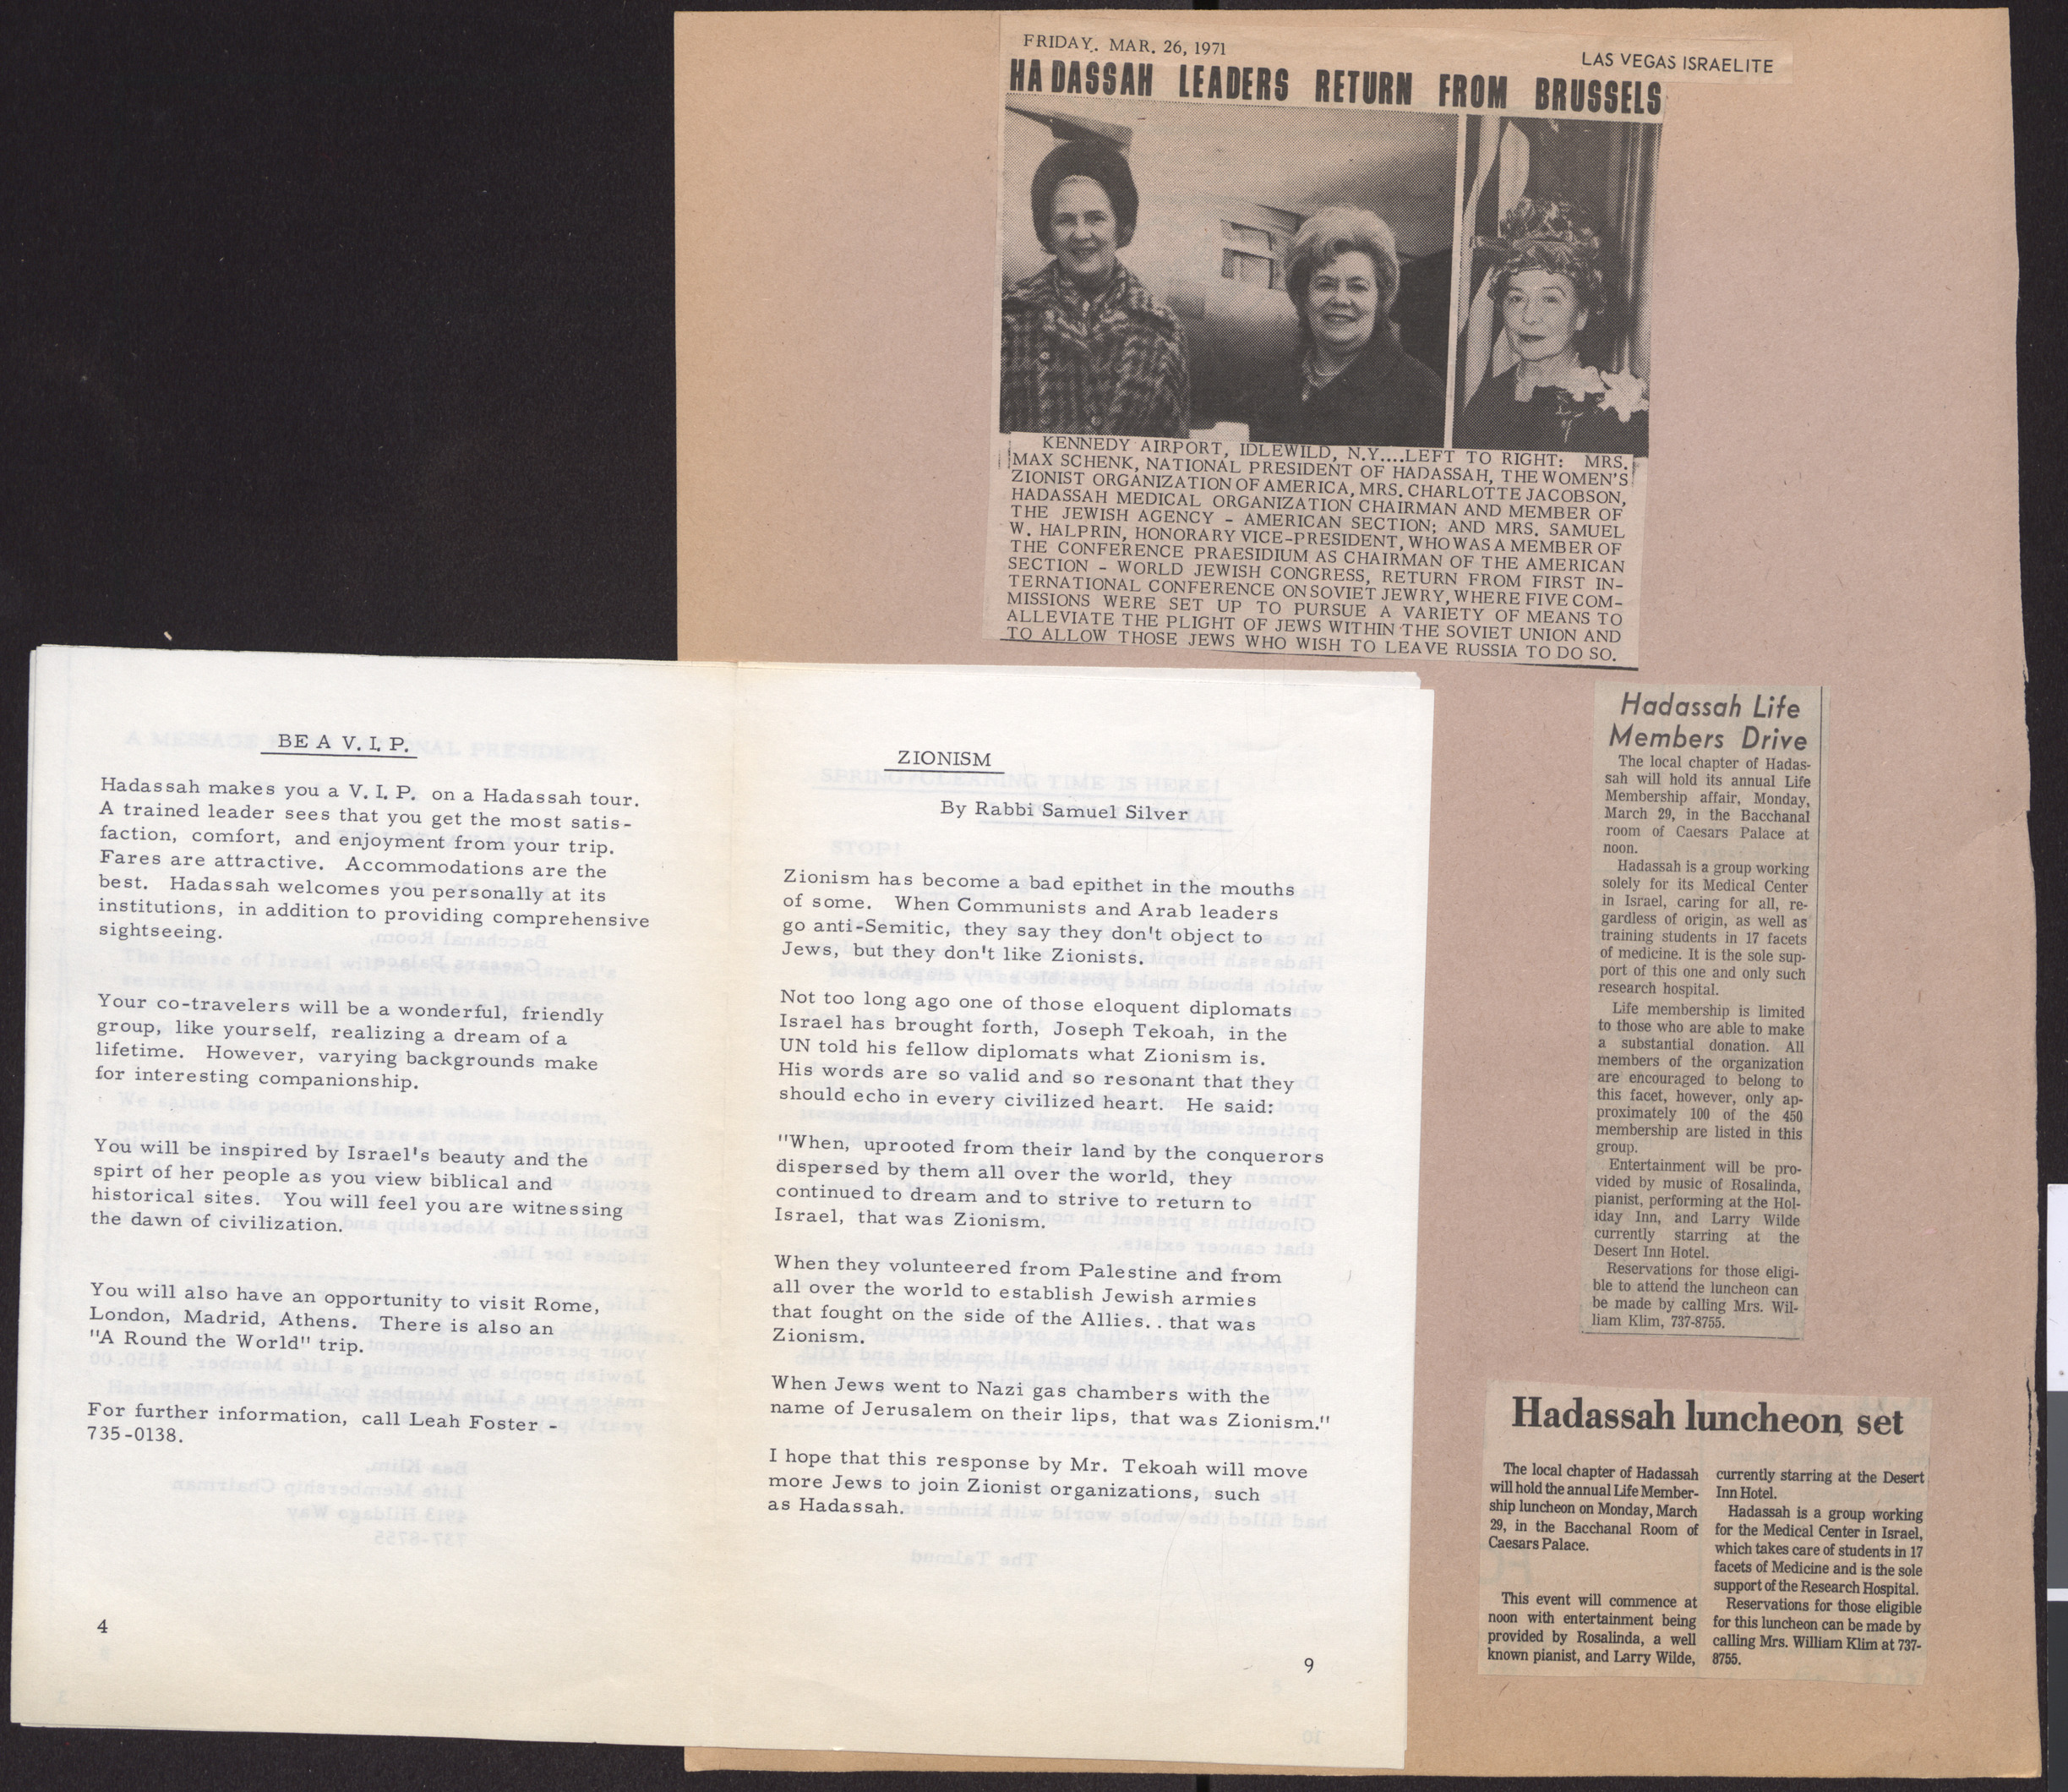 Hadassah newsletter, March 1971, pages 4 and 9